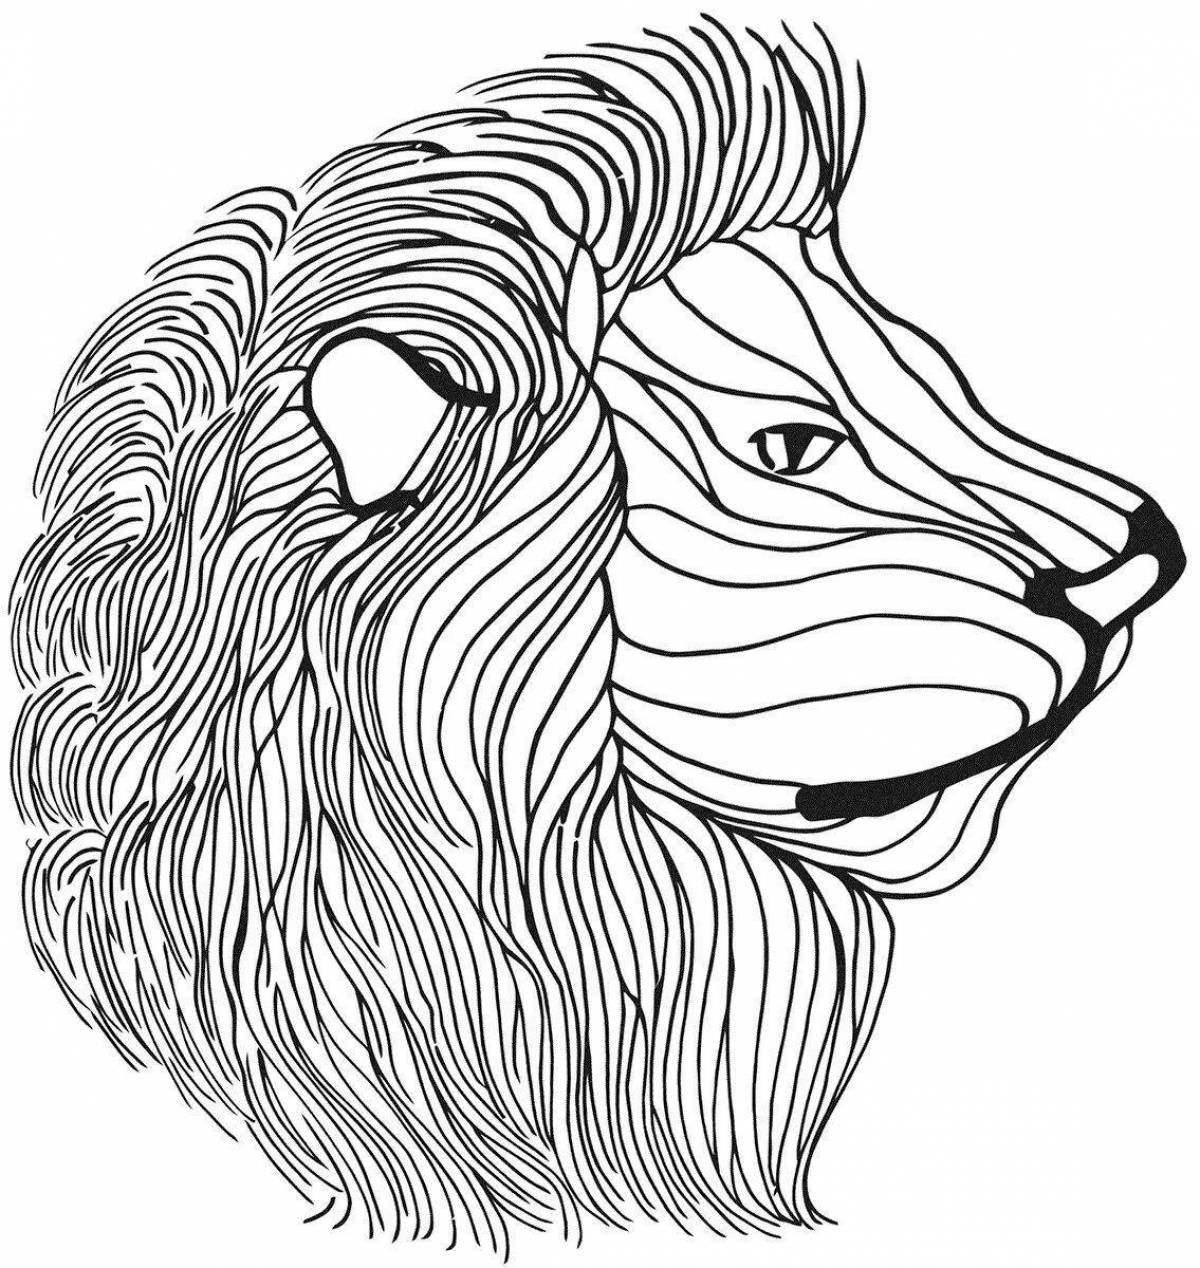 Awesome lion head coloring page